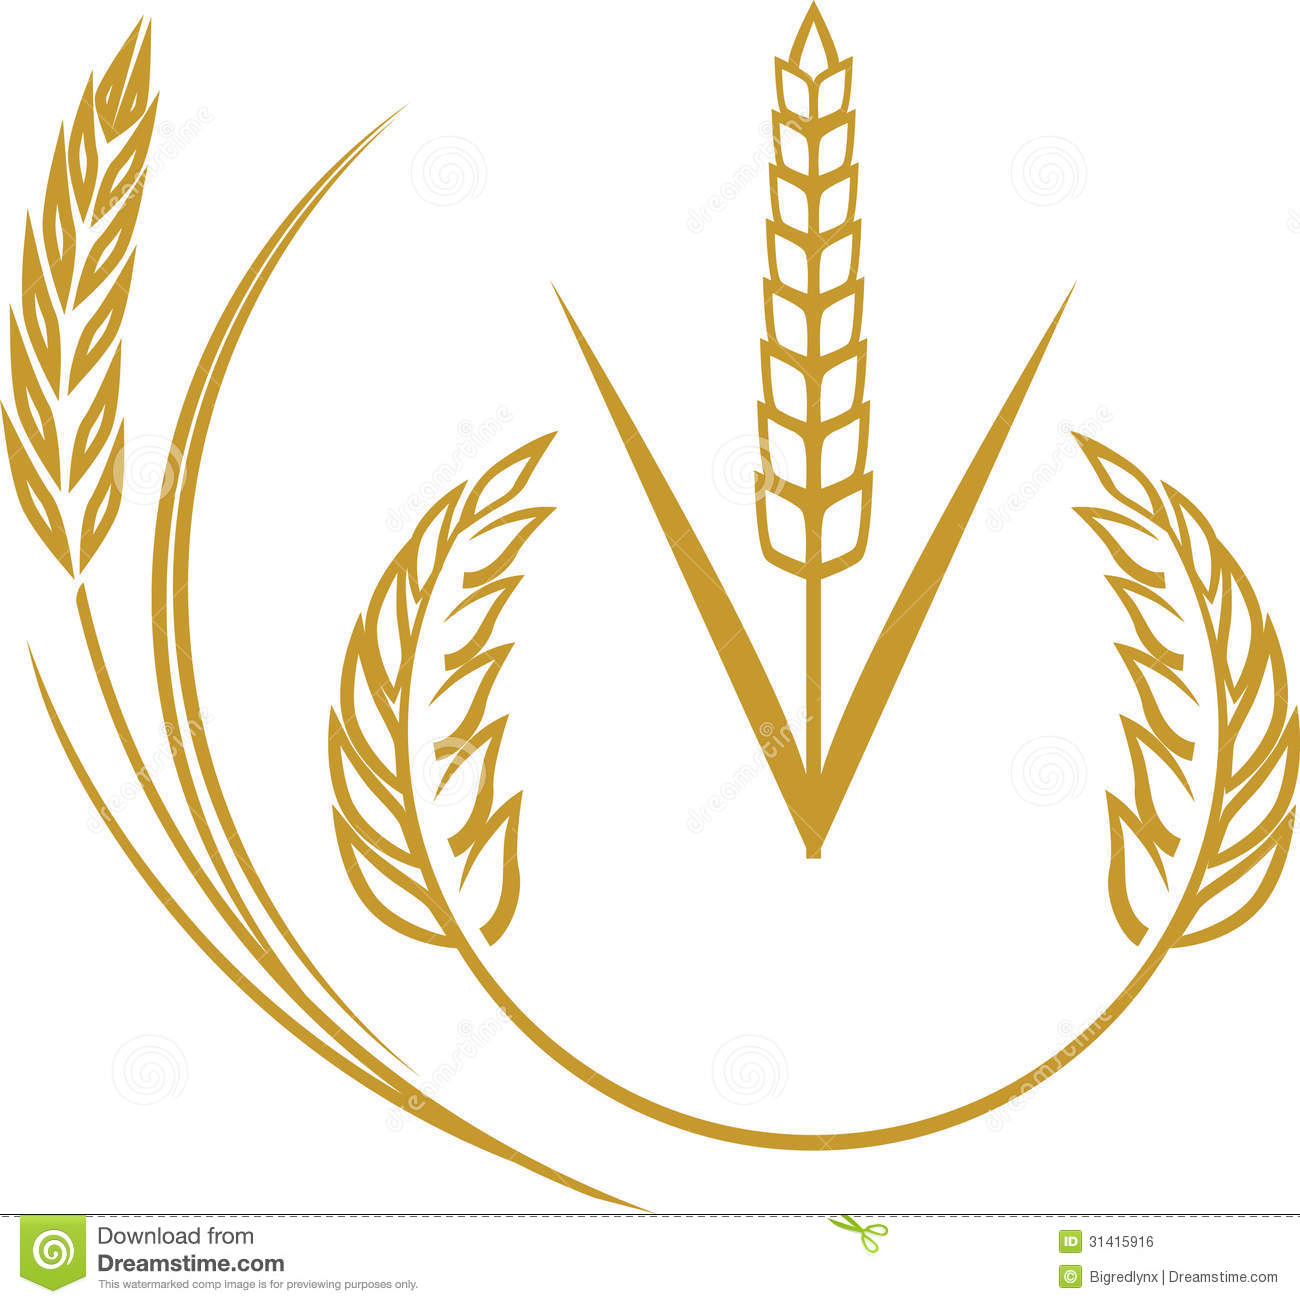 Wheat Elements Royalty Free Stock Image